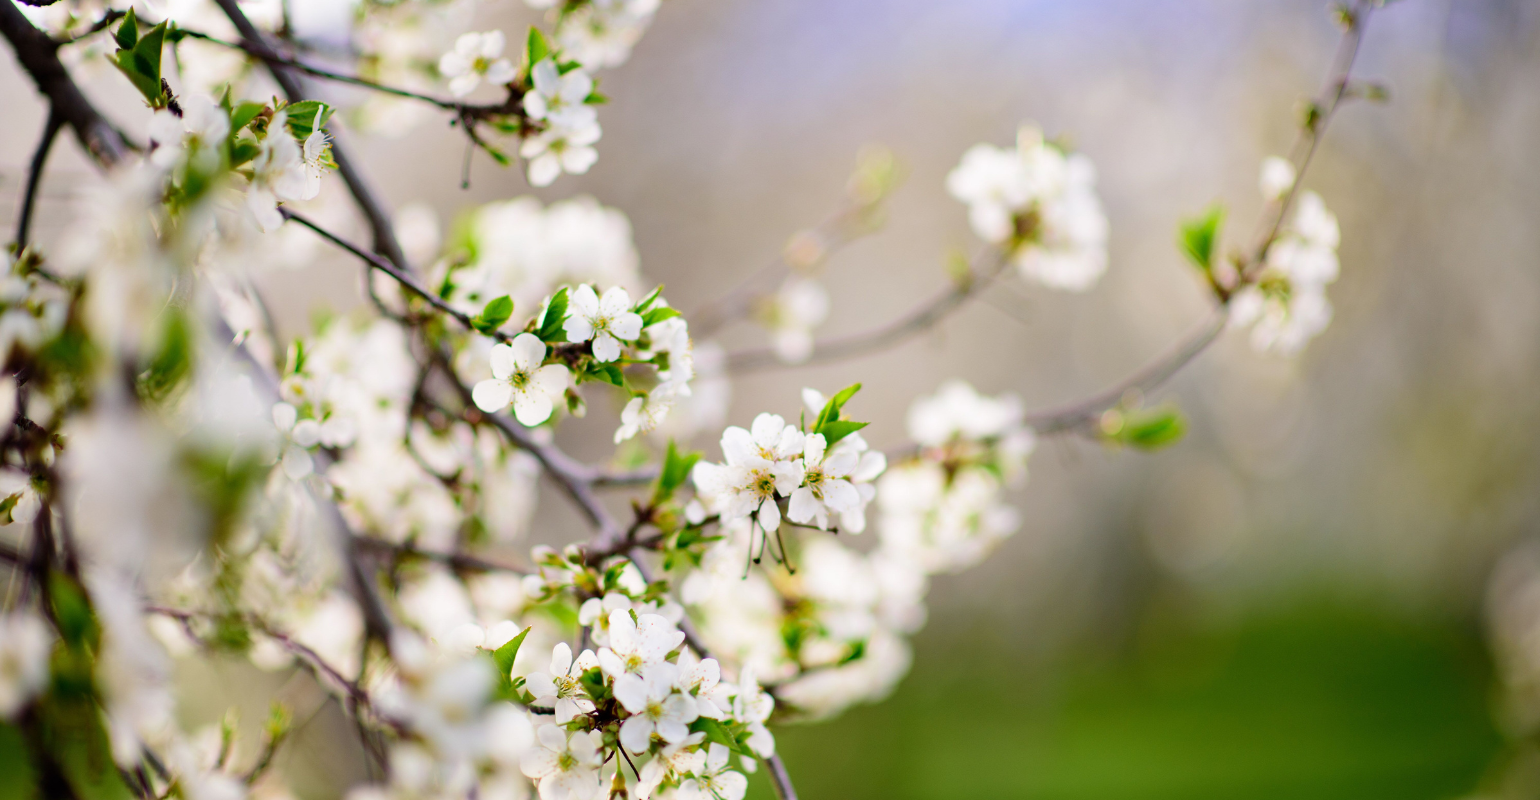 image of cherry blossoms on a tree